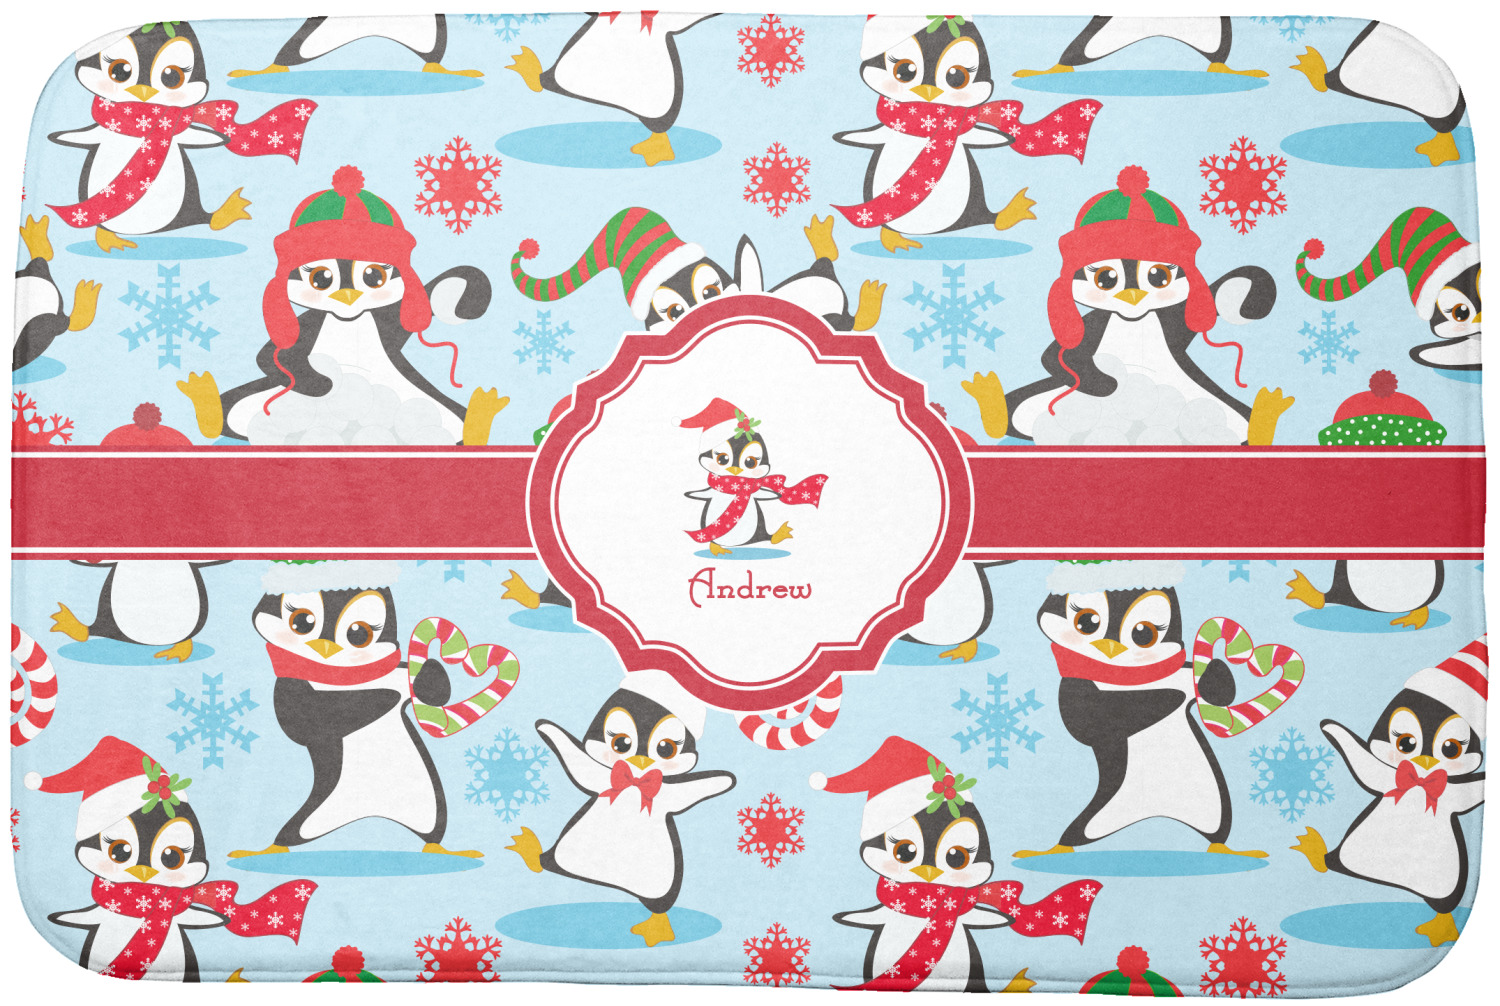 https://www.youcustomizeit.com/common/MAKE/204298/Christmas-Penguins-Dish-Drying-Mat-Approval.jpg?lm=1682006649